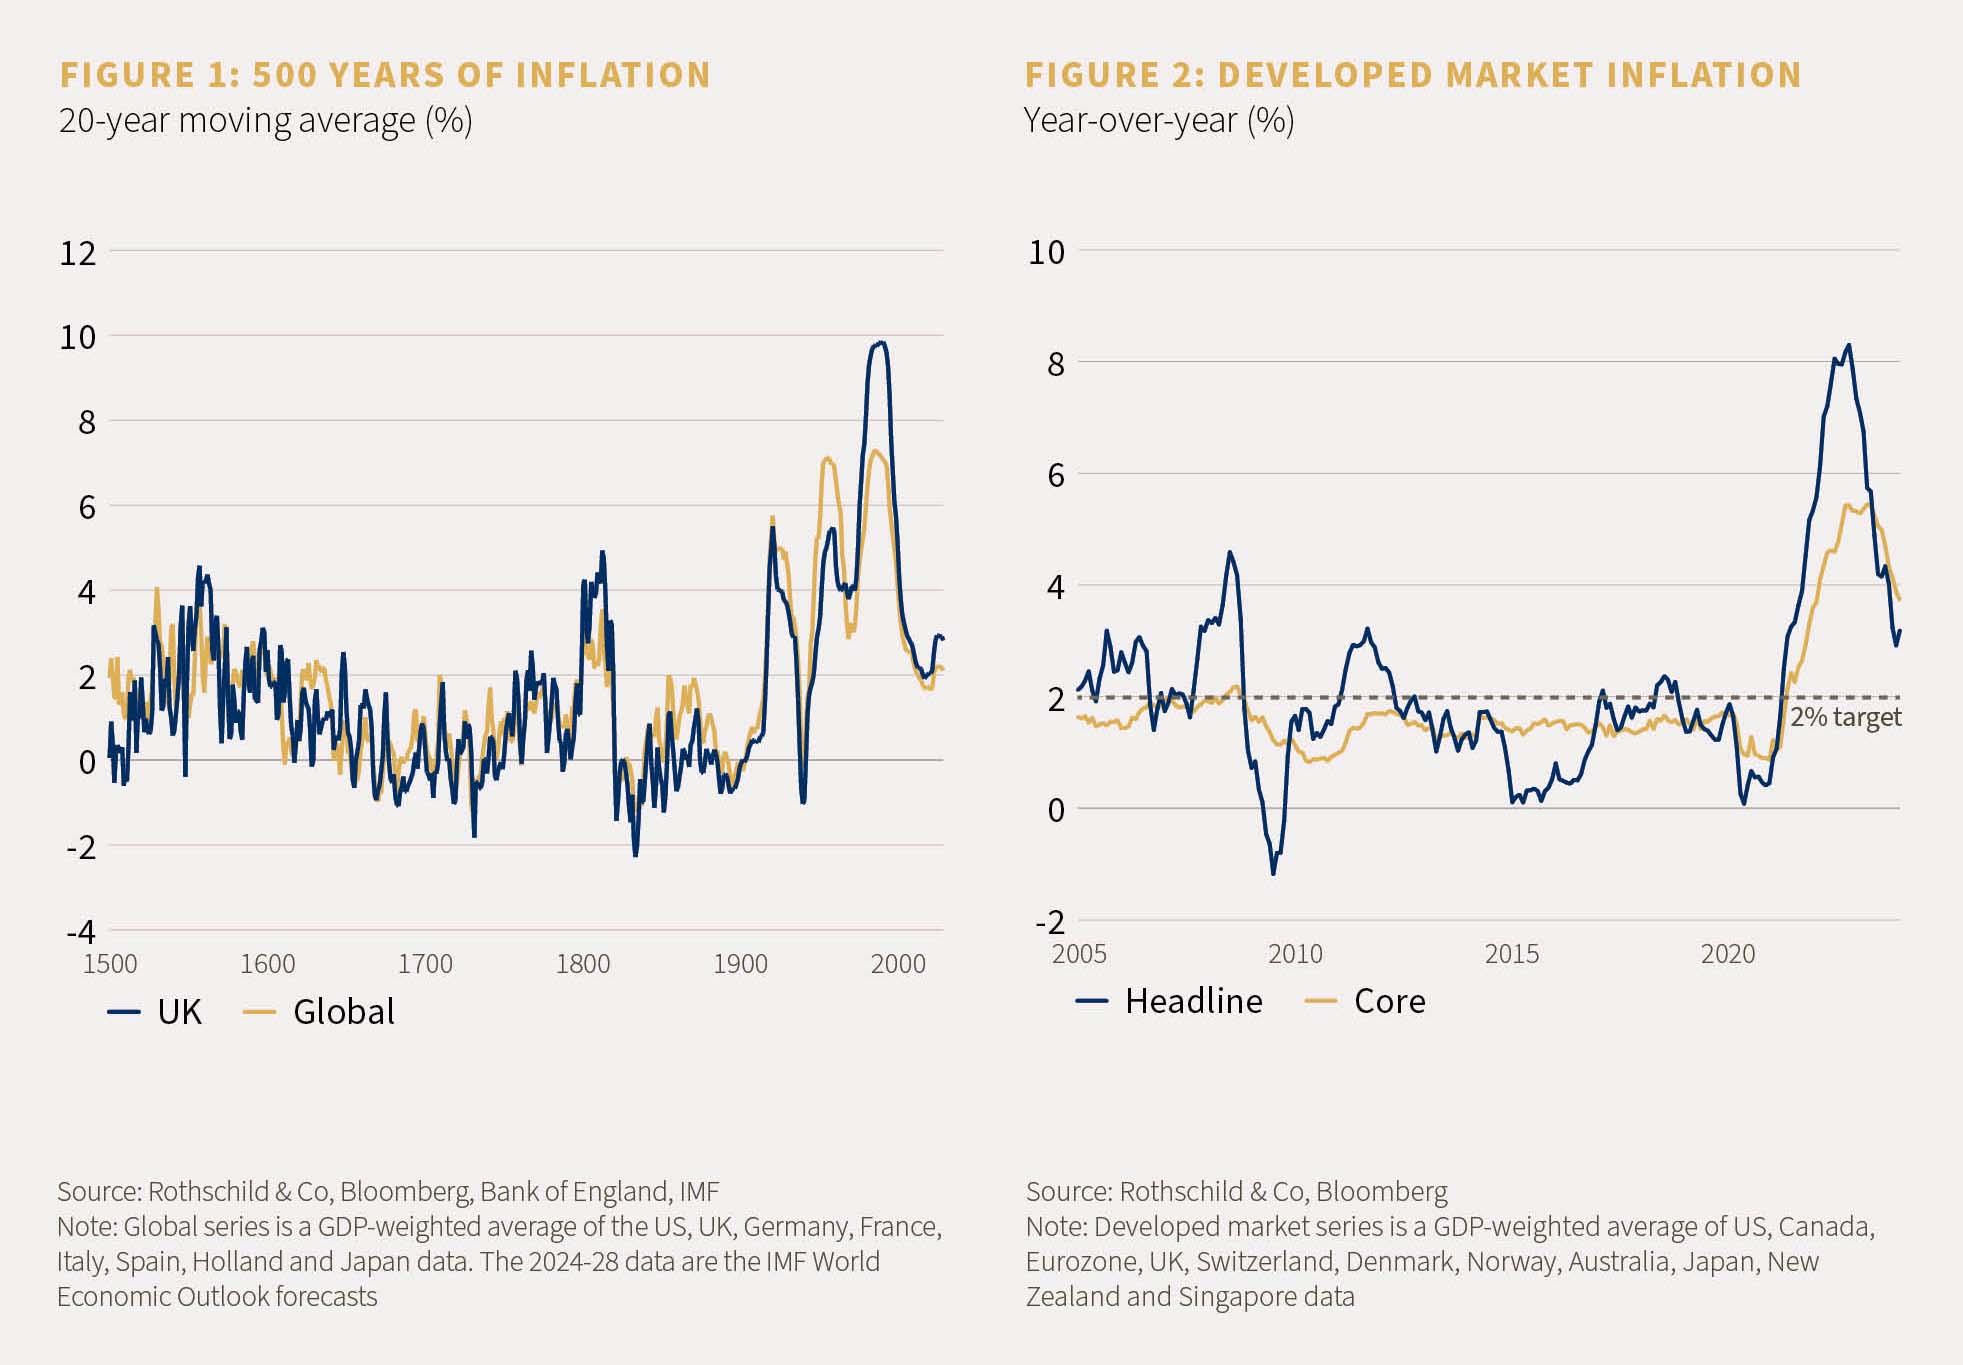 Figure 1 displays 500 years of inflation, and figure 2 dislapys headline, and core, developed market inflation.